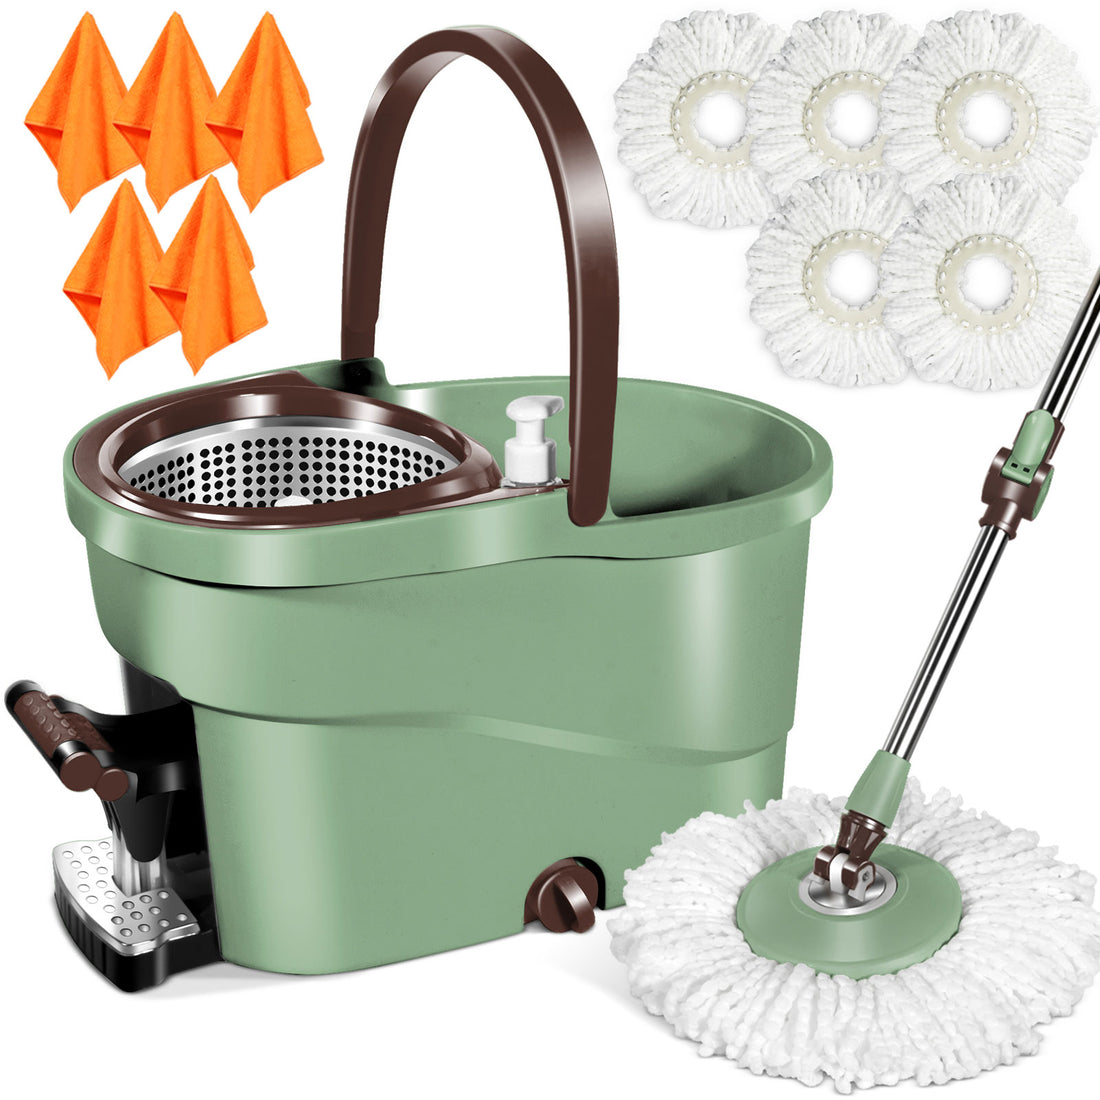 Pedal Spin Mop and Bucket, 360° Spin Mop with 5 Mop Heads, Suitable for Home Floor Kitchen Mop